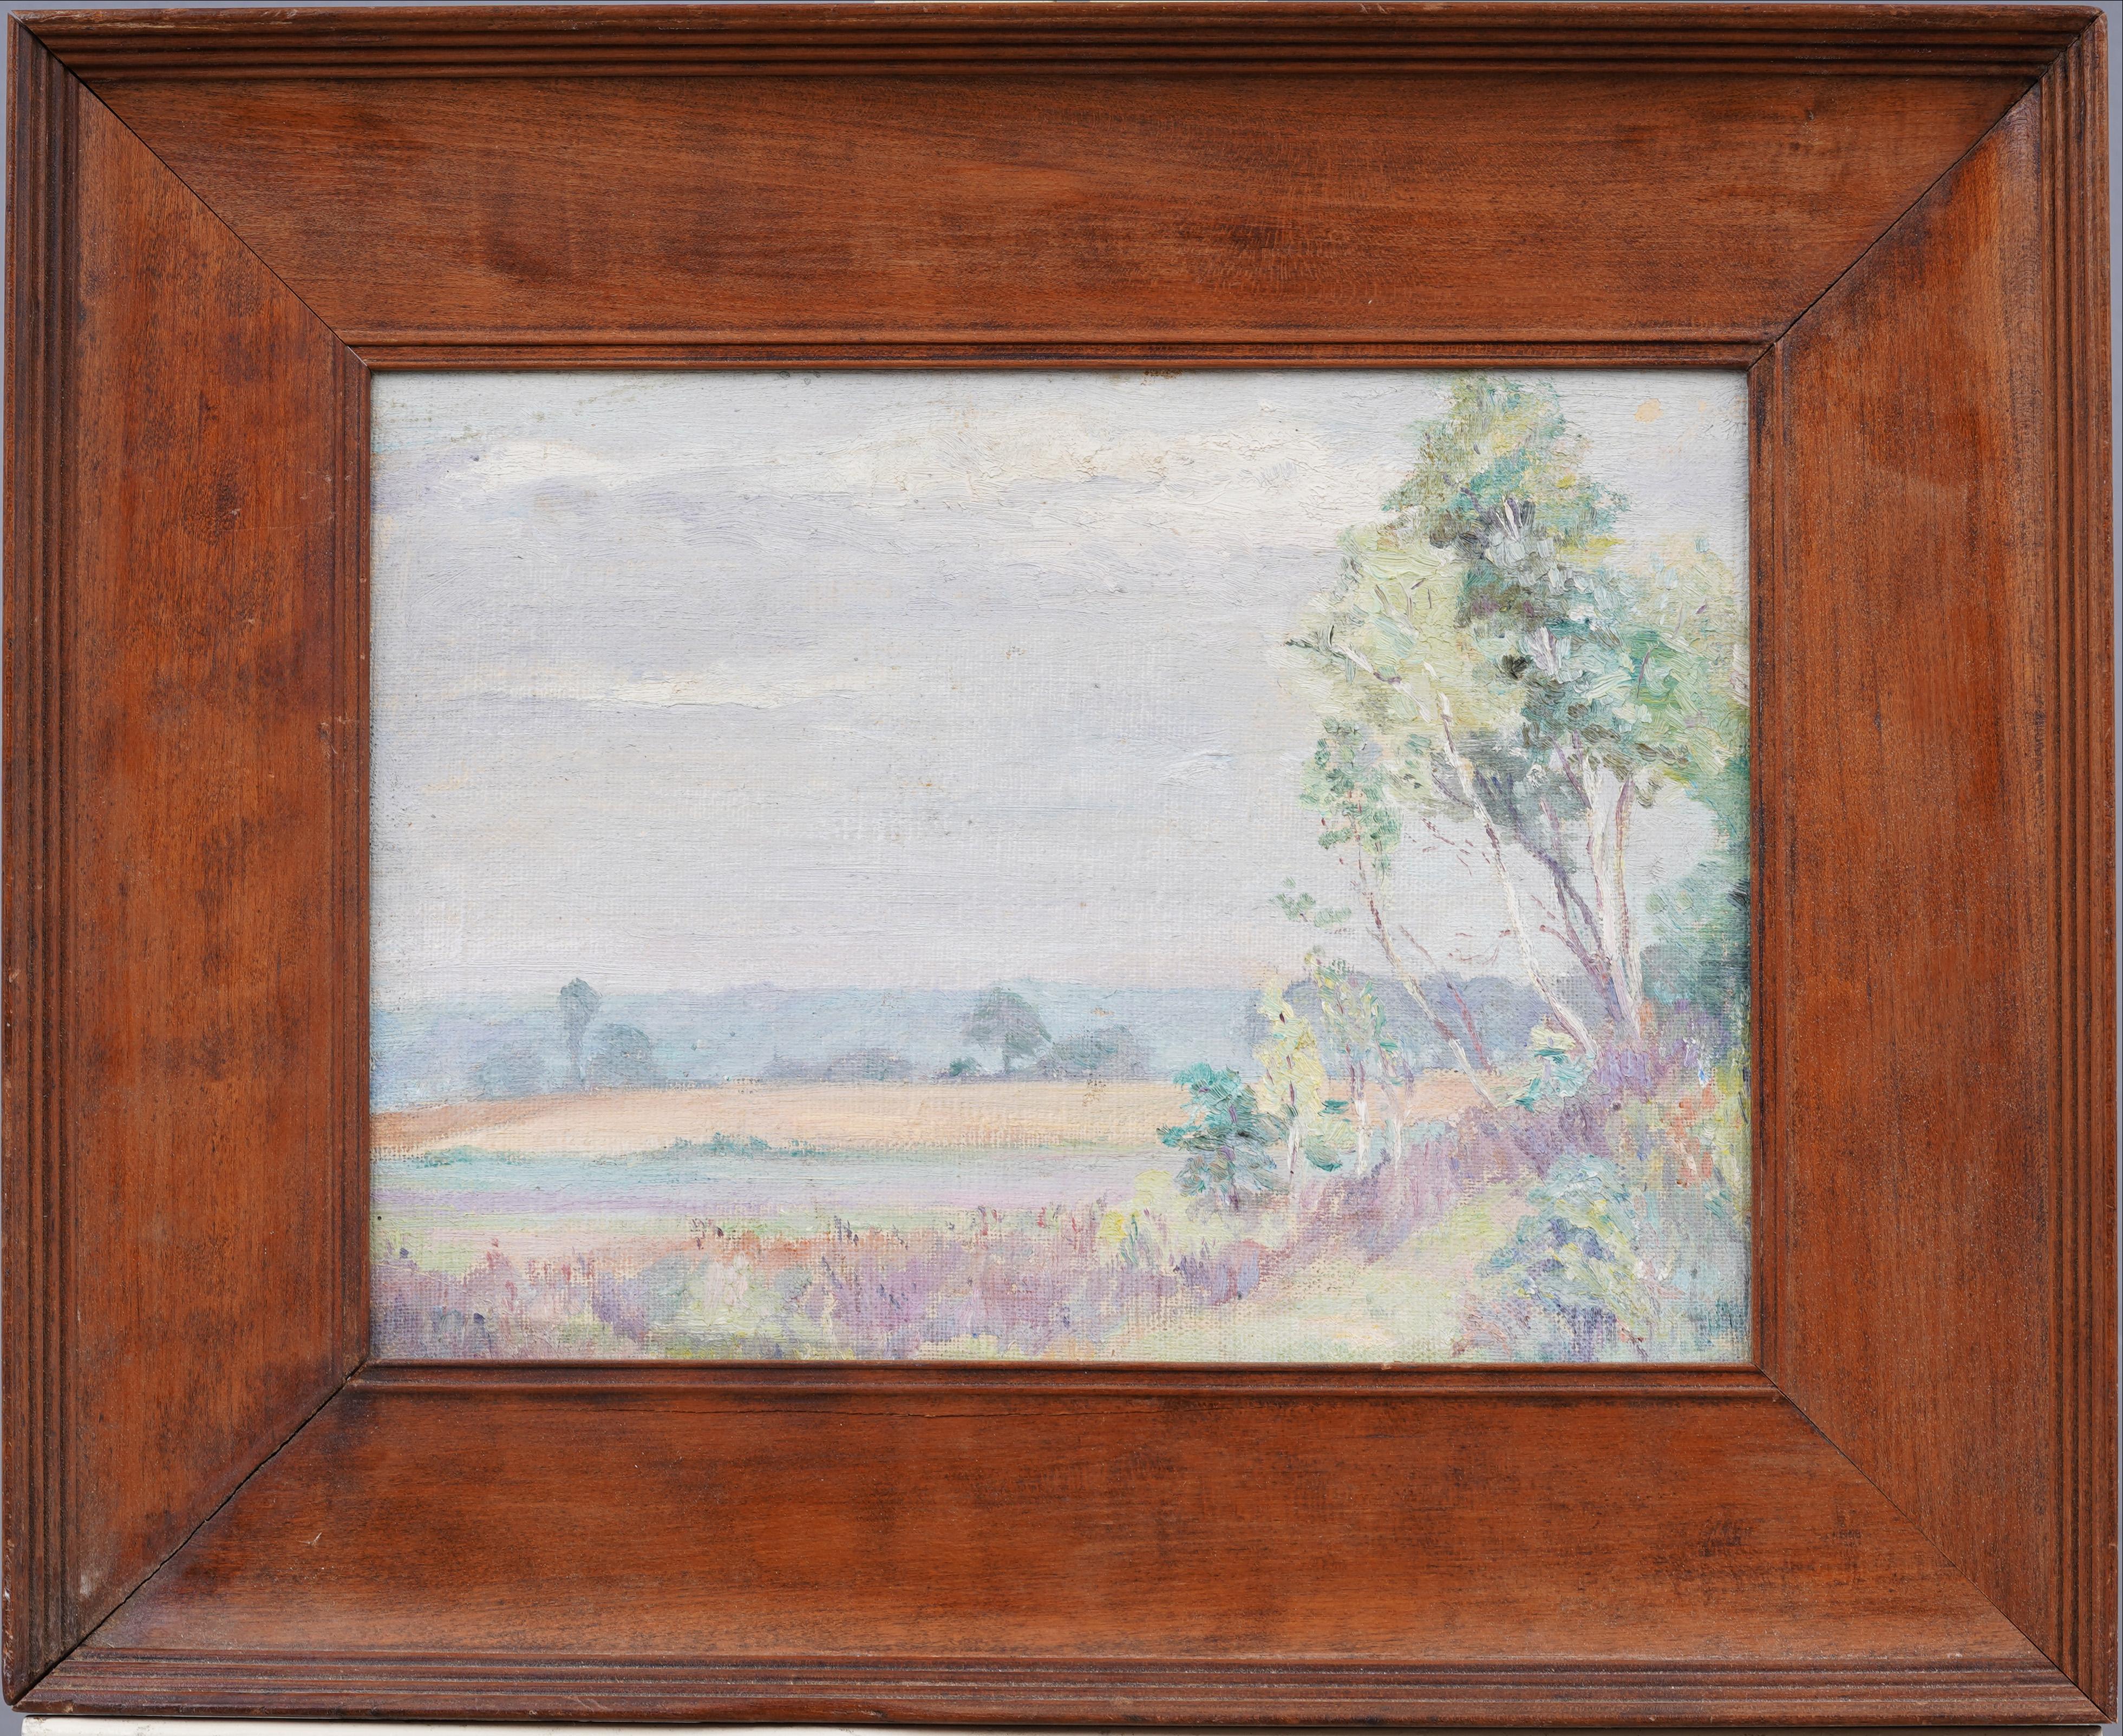 Early American impressionist landscape painting.  Framed.  Possibly signed verso.  Oil on board.